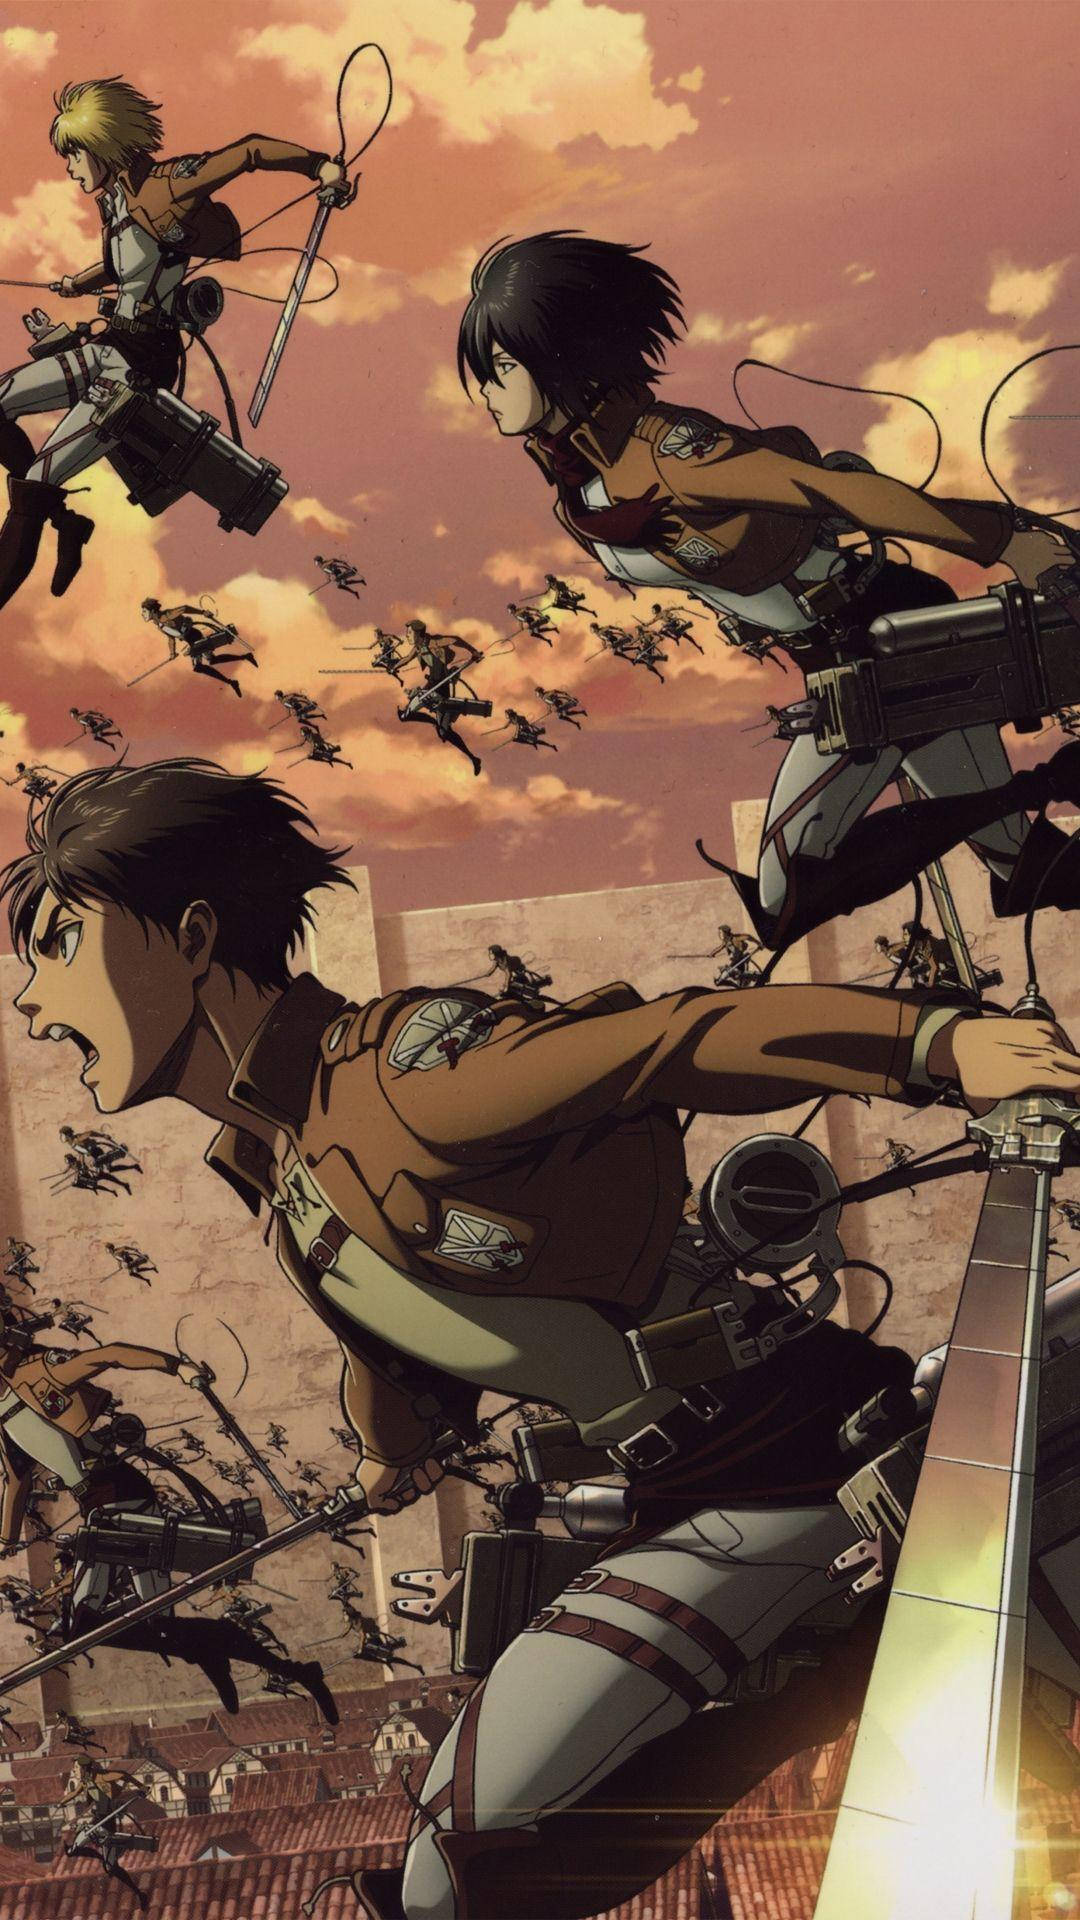 Flying Odm Gear Attack On Titan Iphone